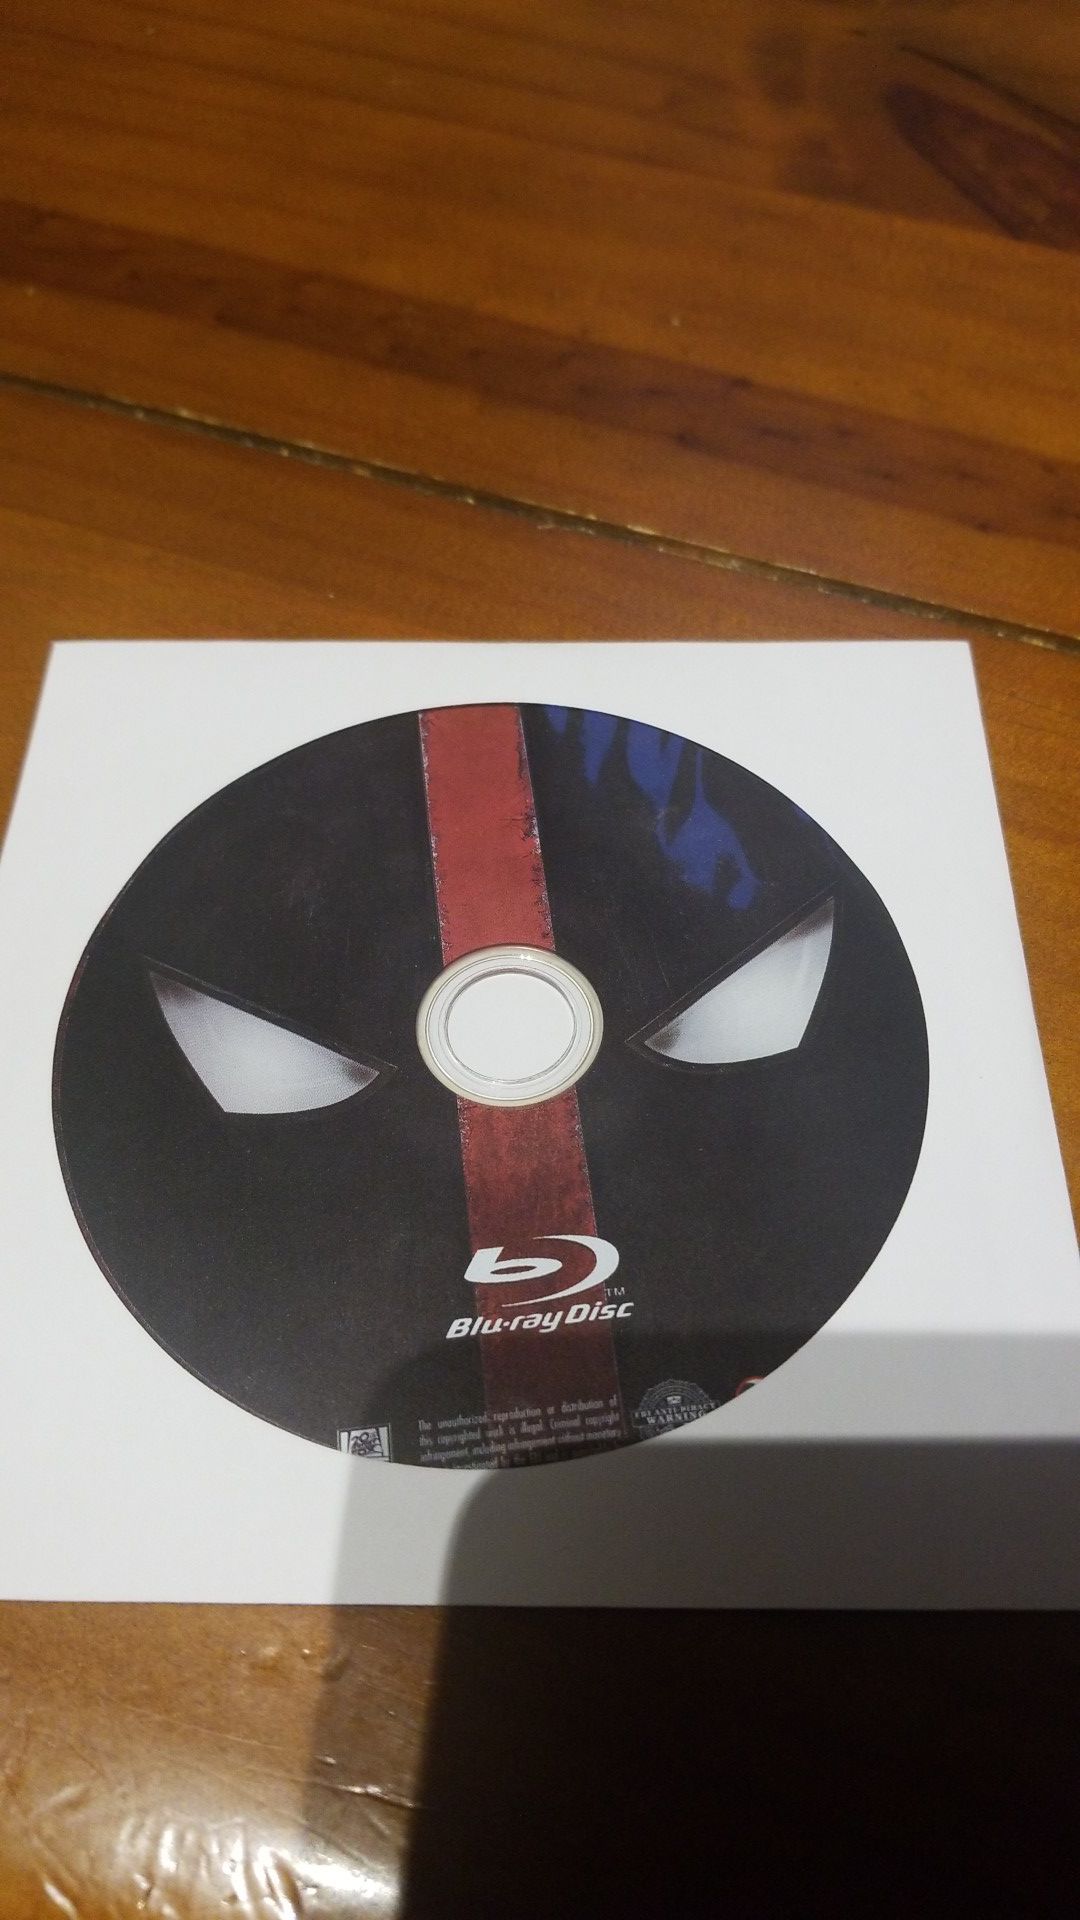 Deadpool bluray. No cover or anything else, just disk